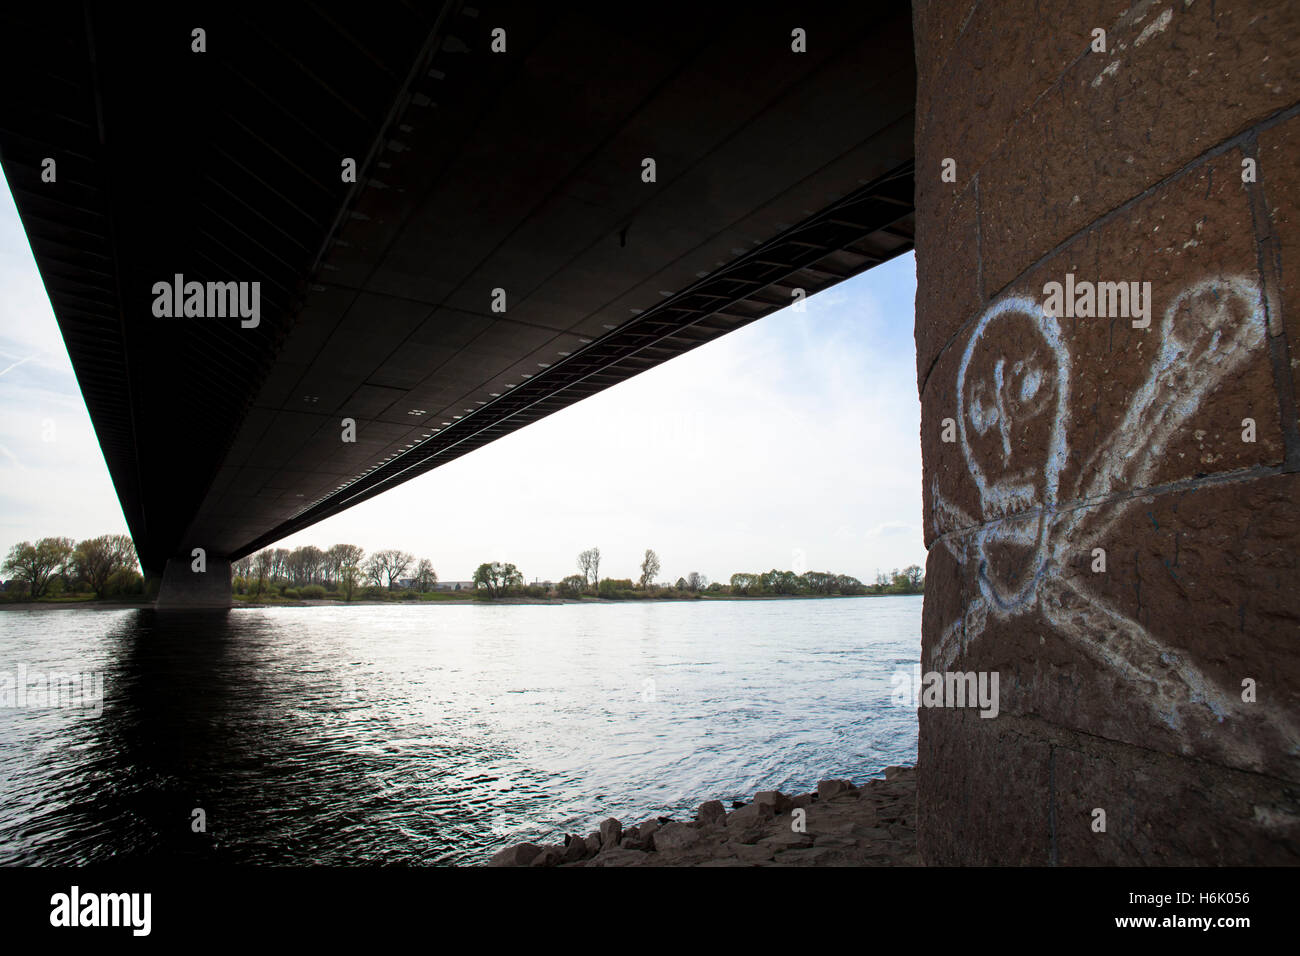 Germany, Leverkusen, the river Rhine bridge of the Autobahn A1 between Leverkusen and Cologne, skull and crossbones on a pier of Stock Photo